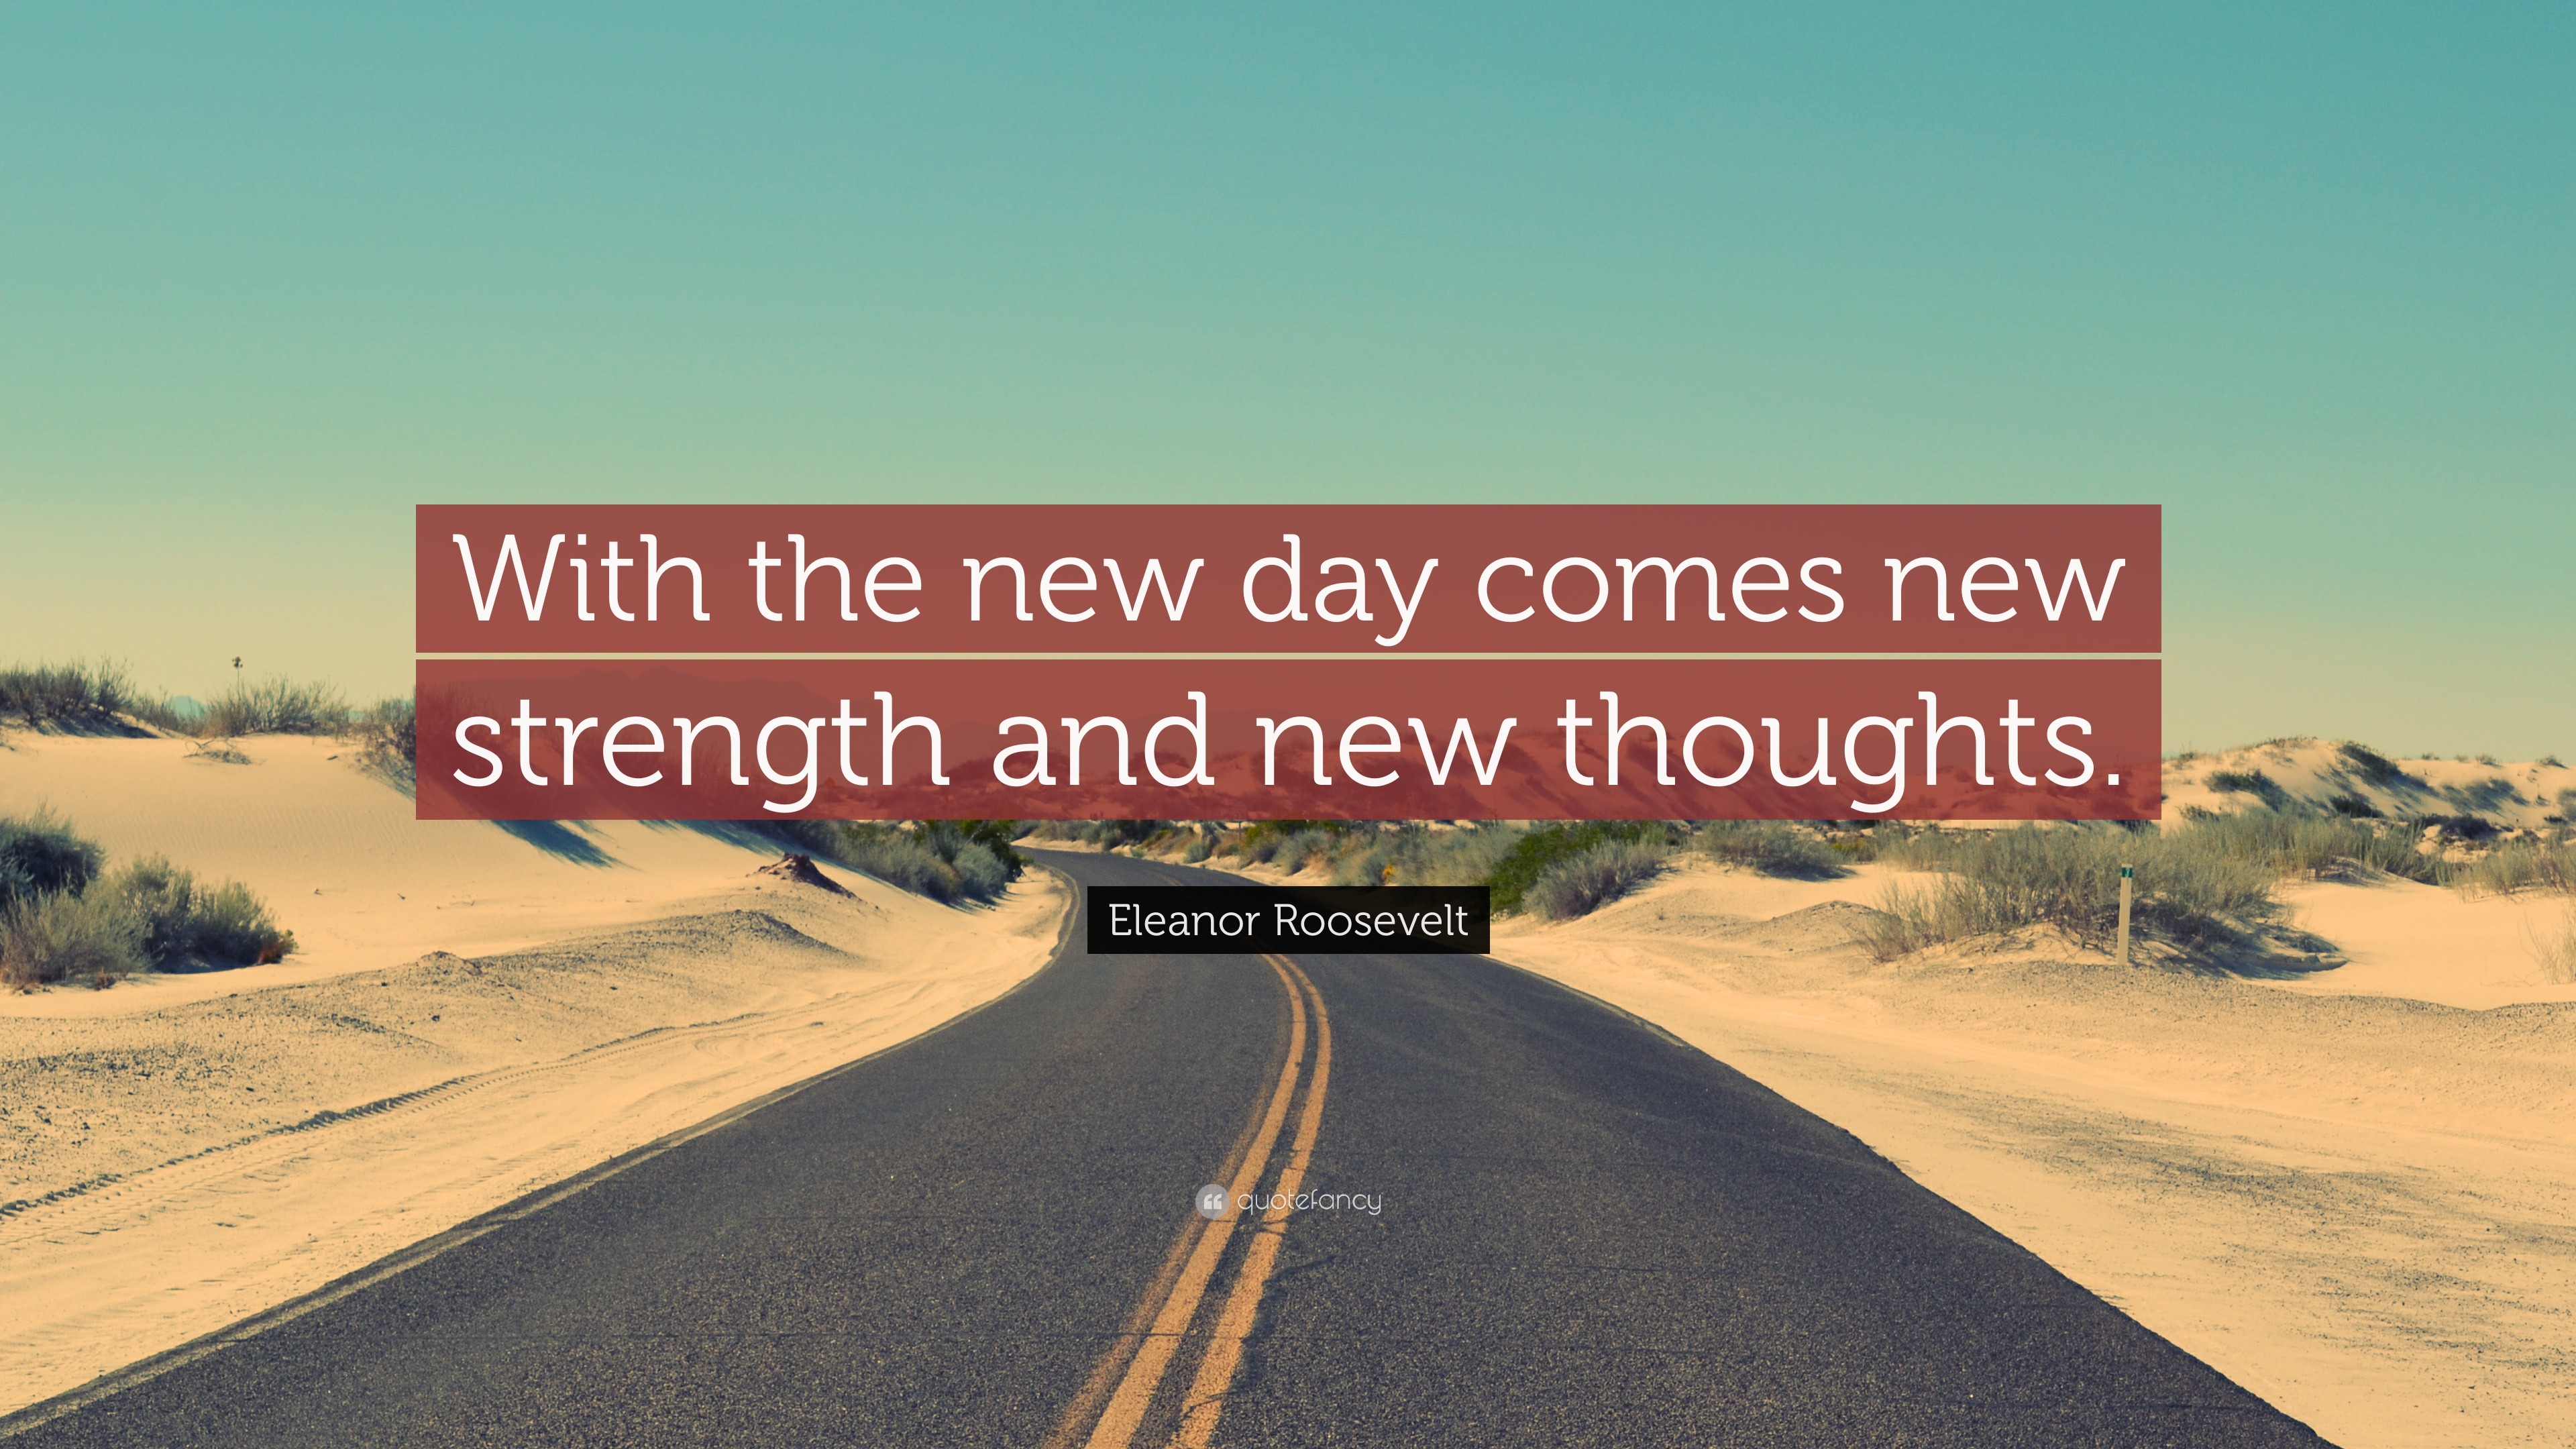 Eleanor Roosevelt - With the new day comes new strength